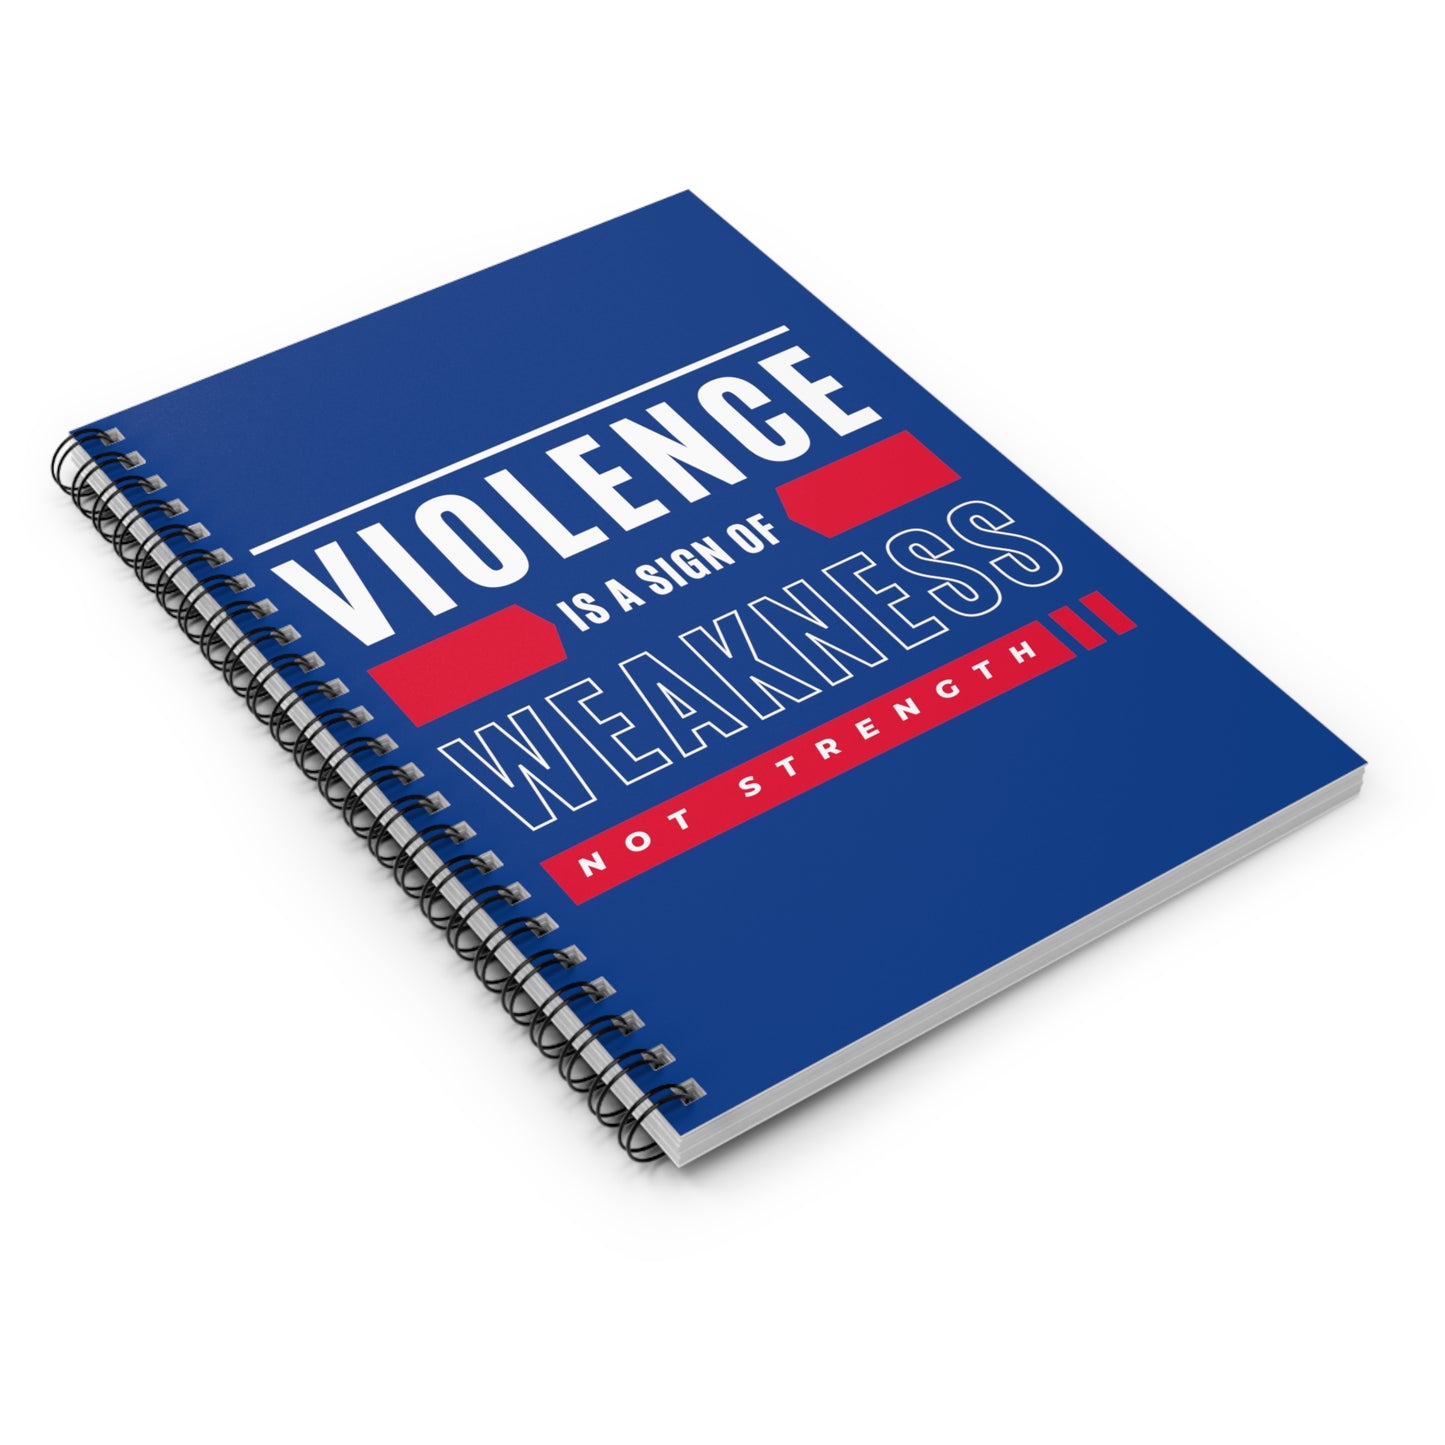 Violence is a Sign of Weakness Spiral Notebook